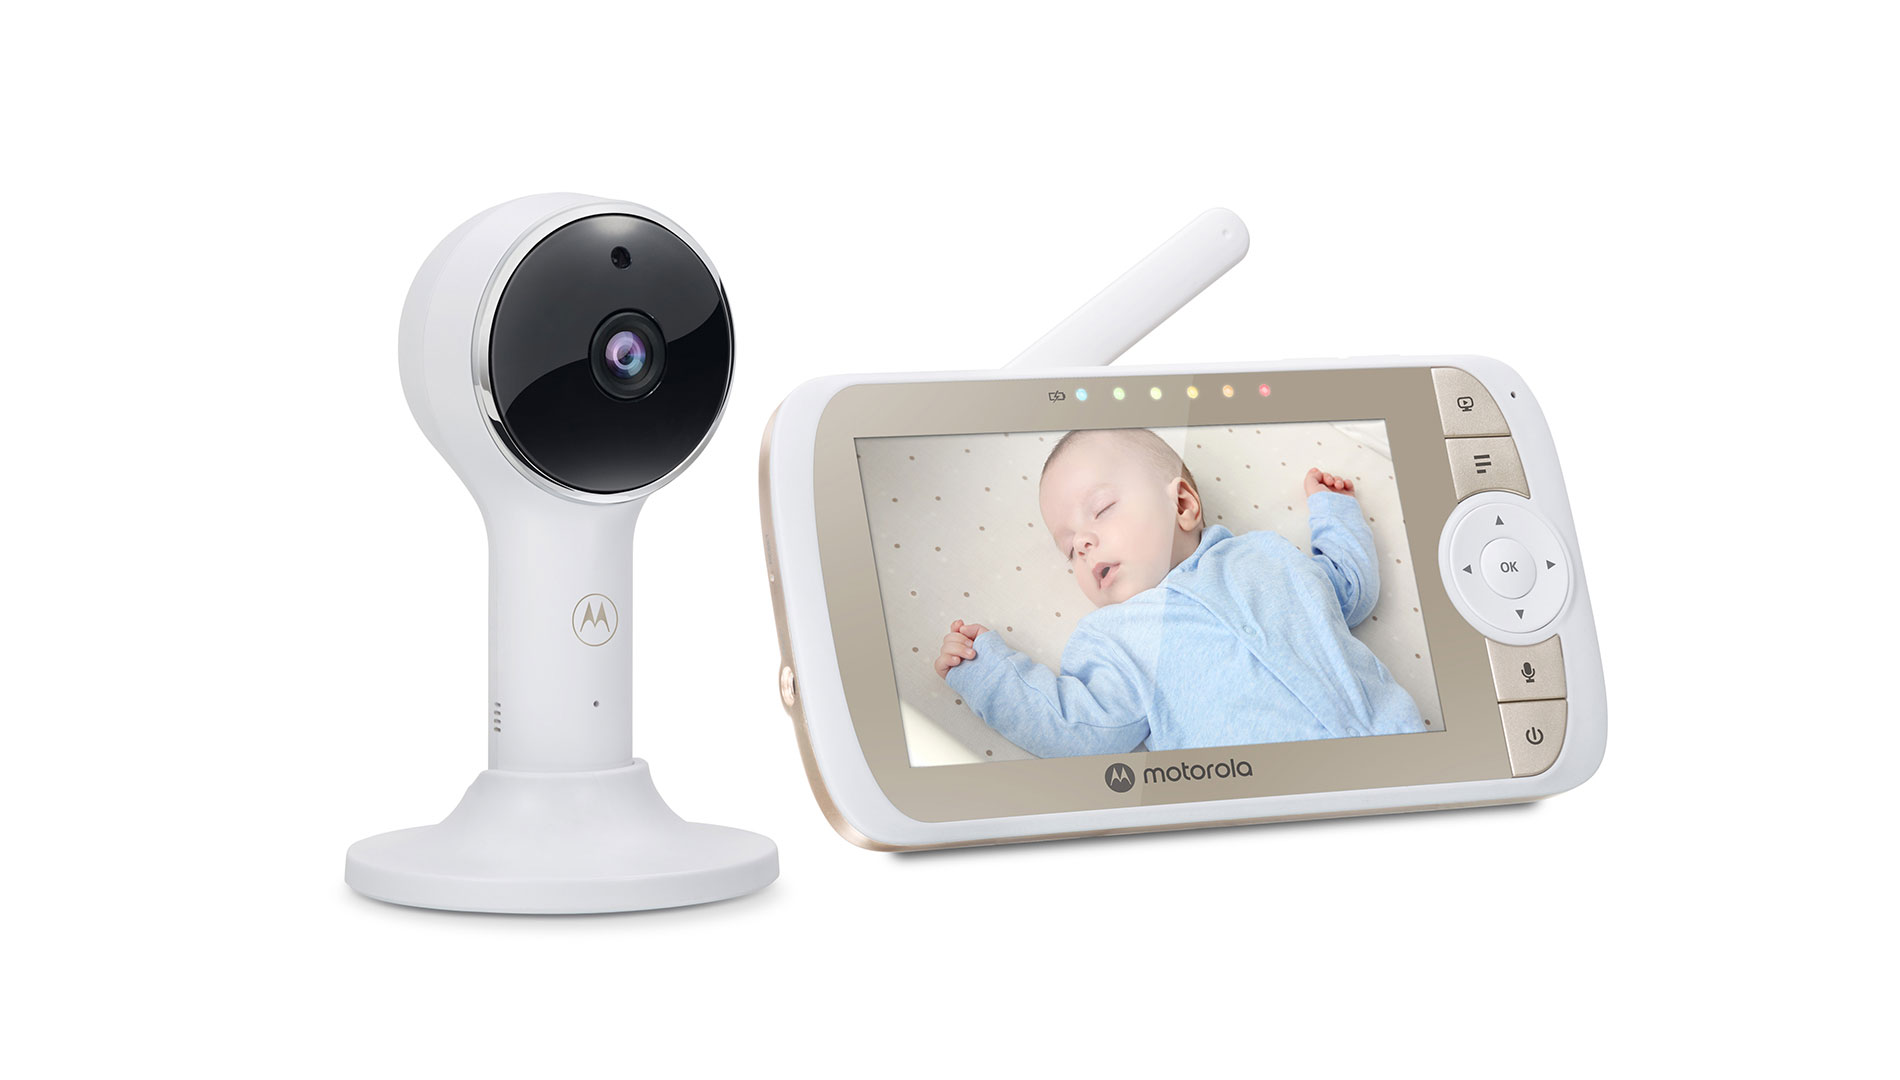 Motorola VM65 Connect HD WiFi Video Baby Monitor - Product image